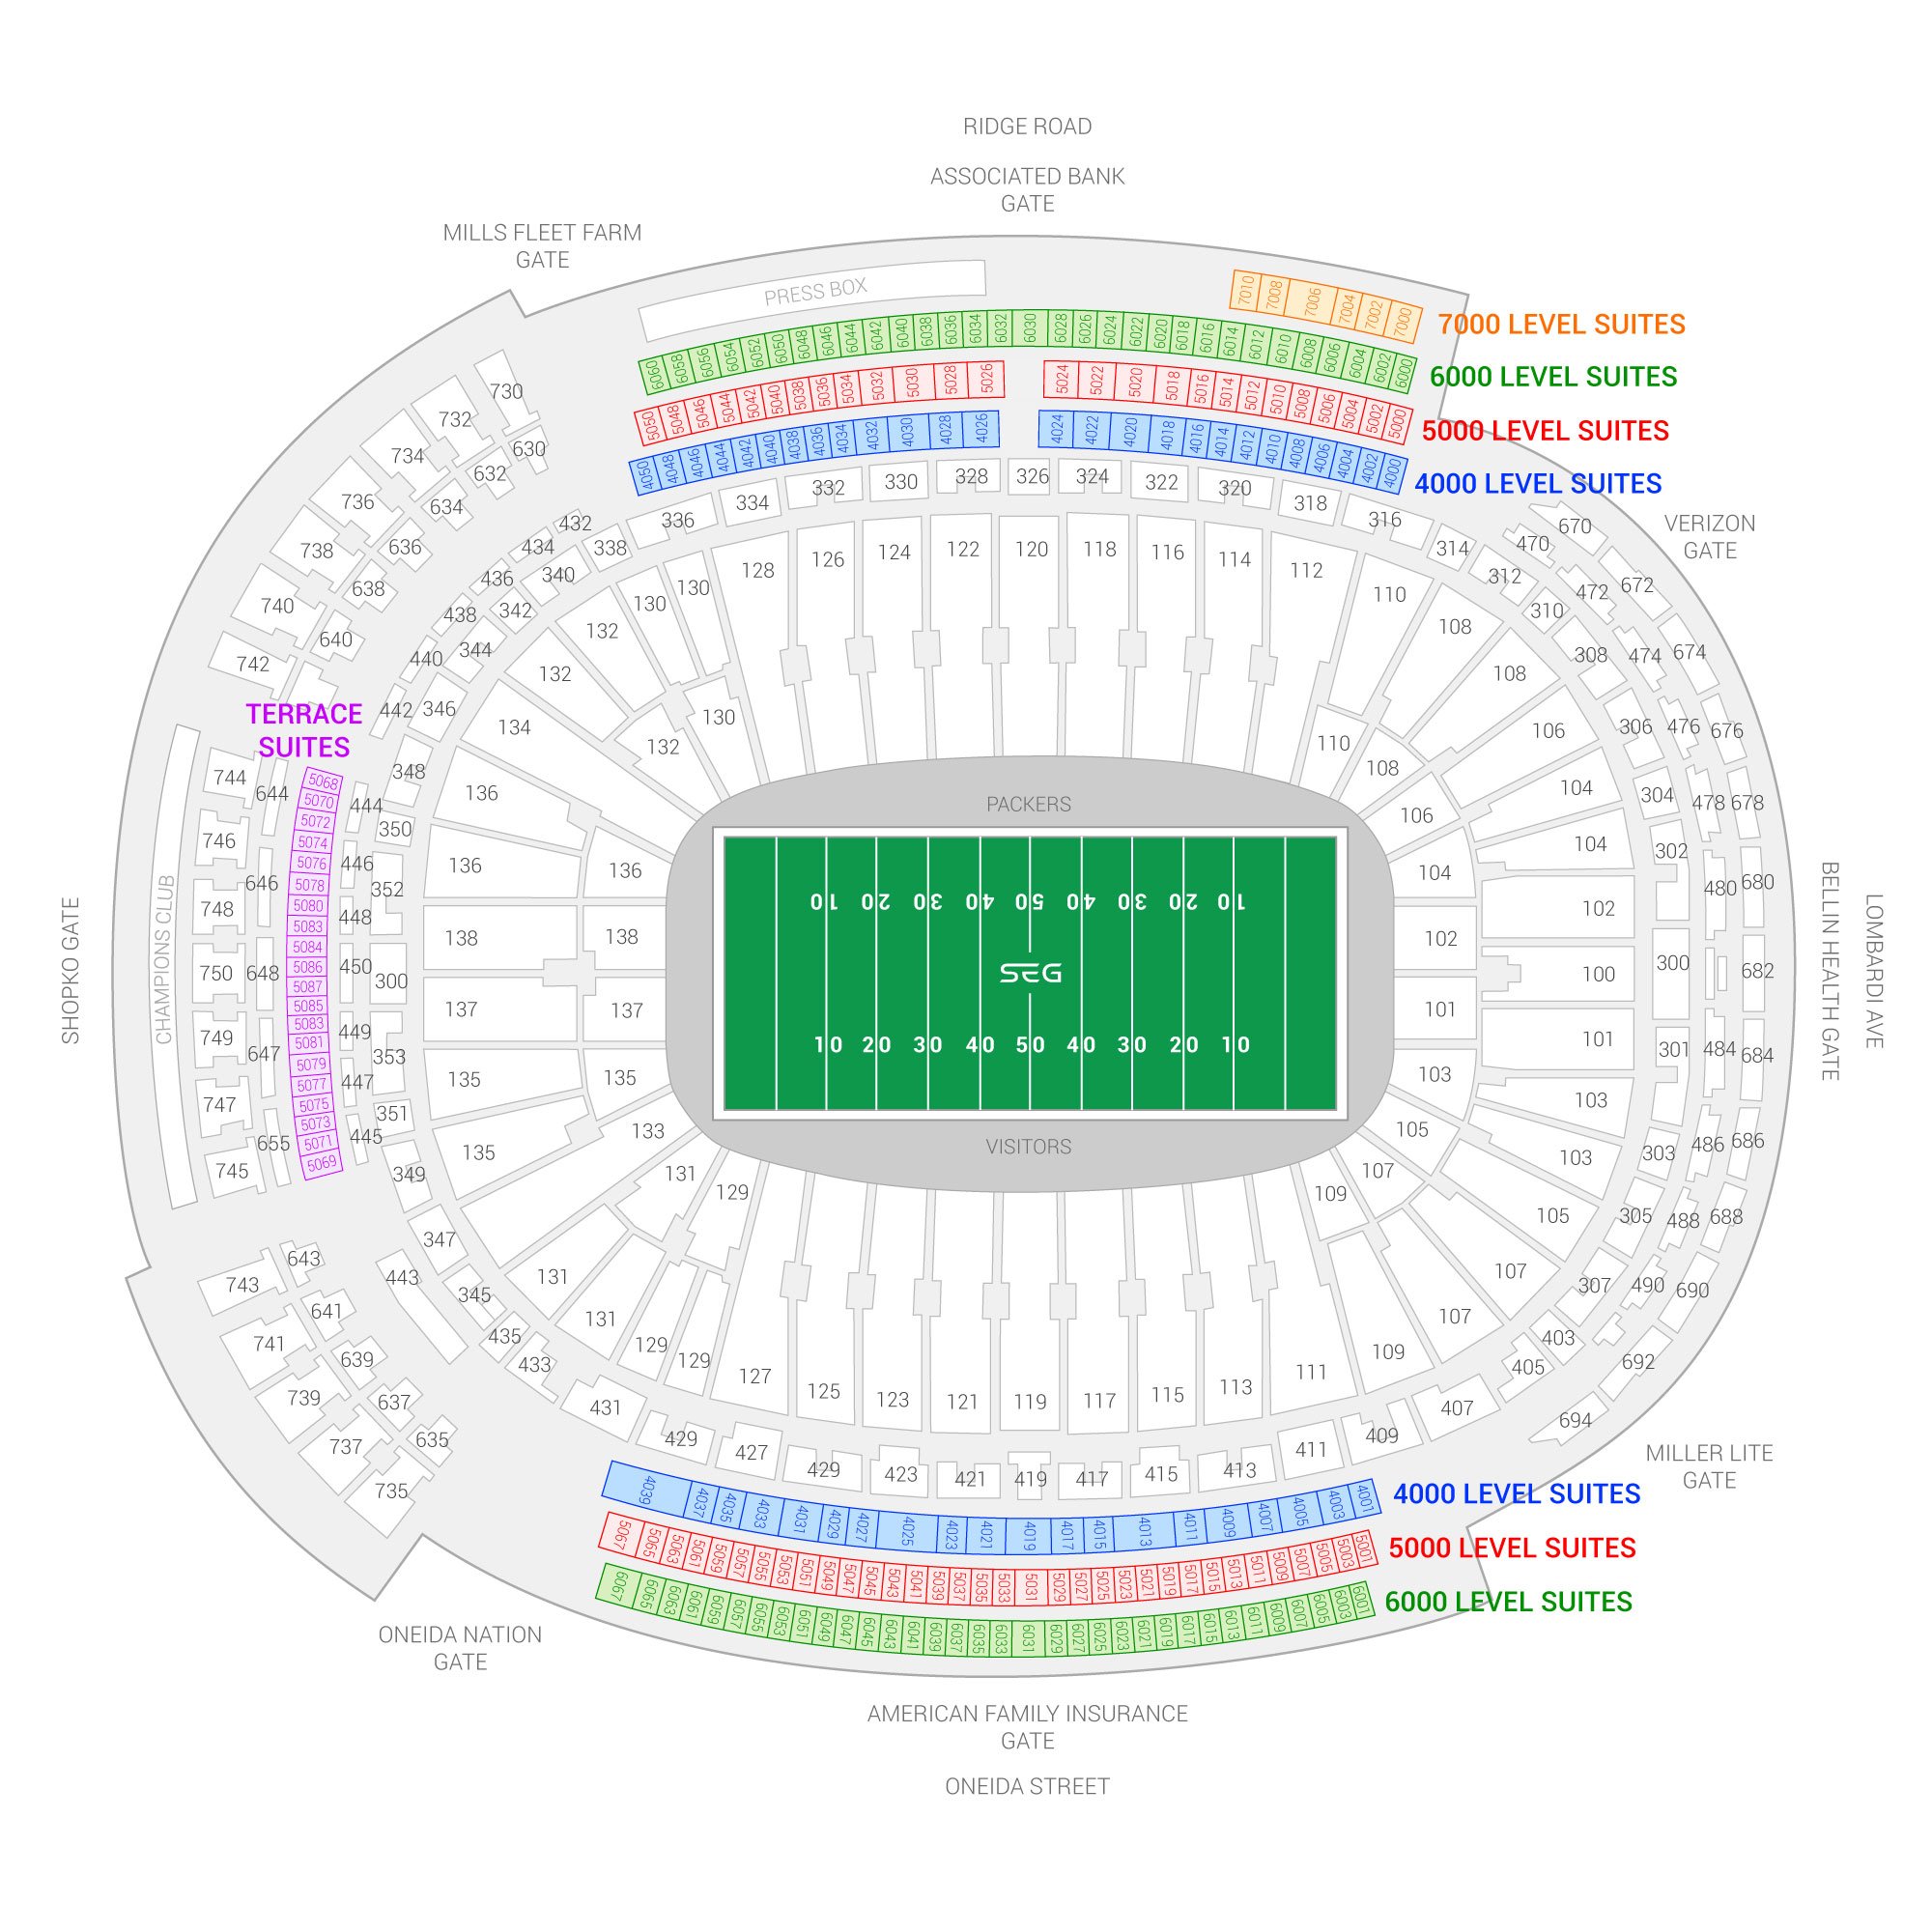 Lambeau Field / Green Bay Packers Suite Map and Seating Chart